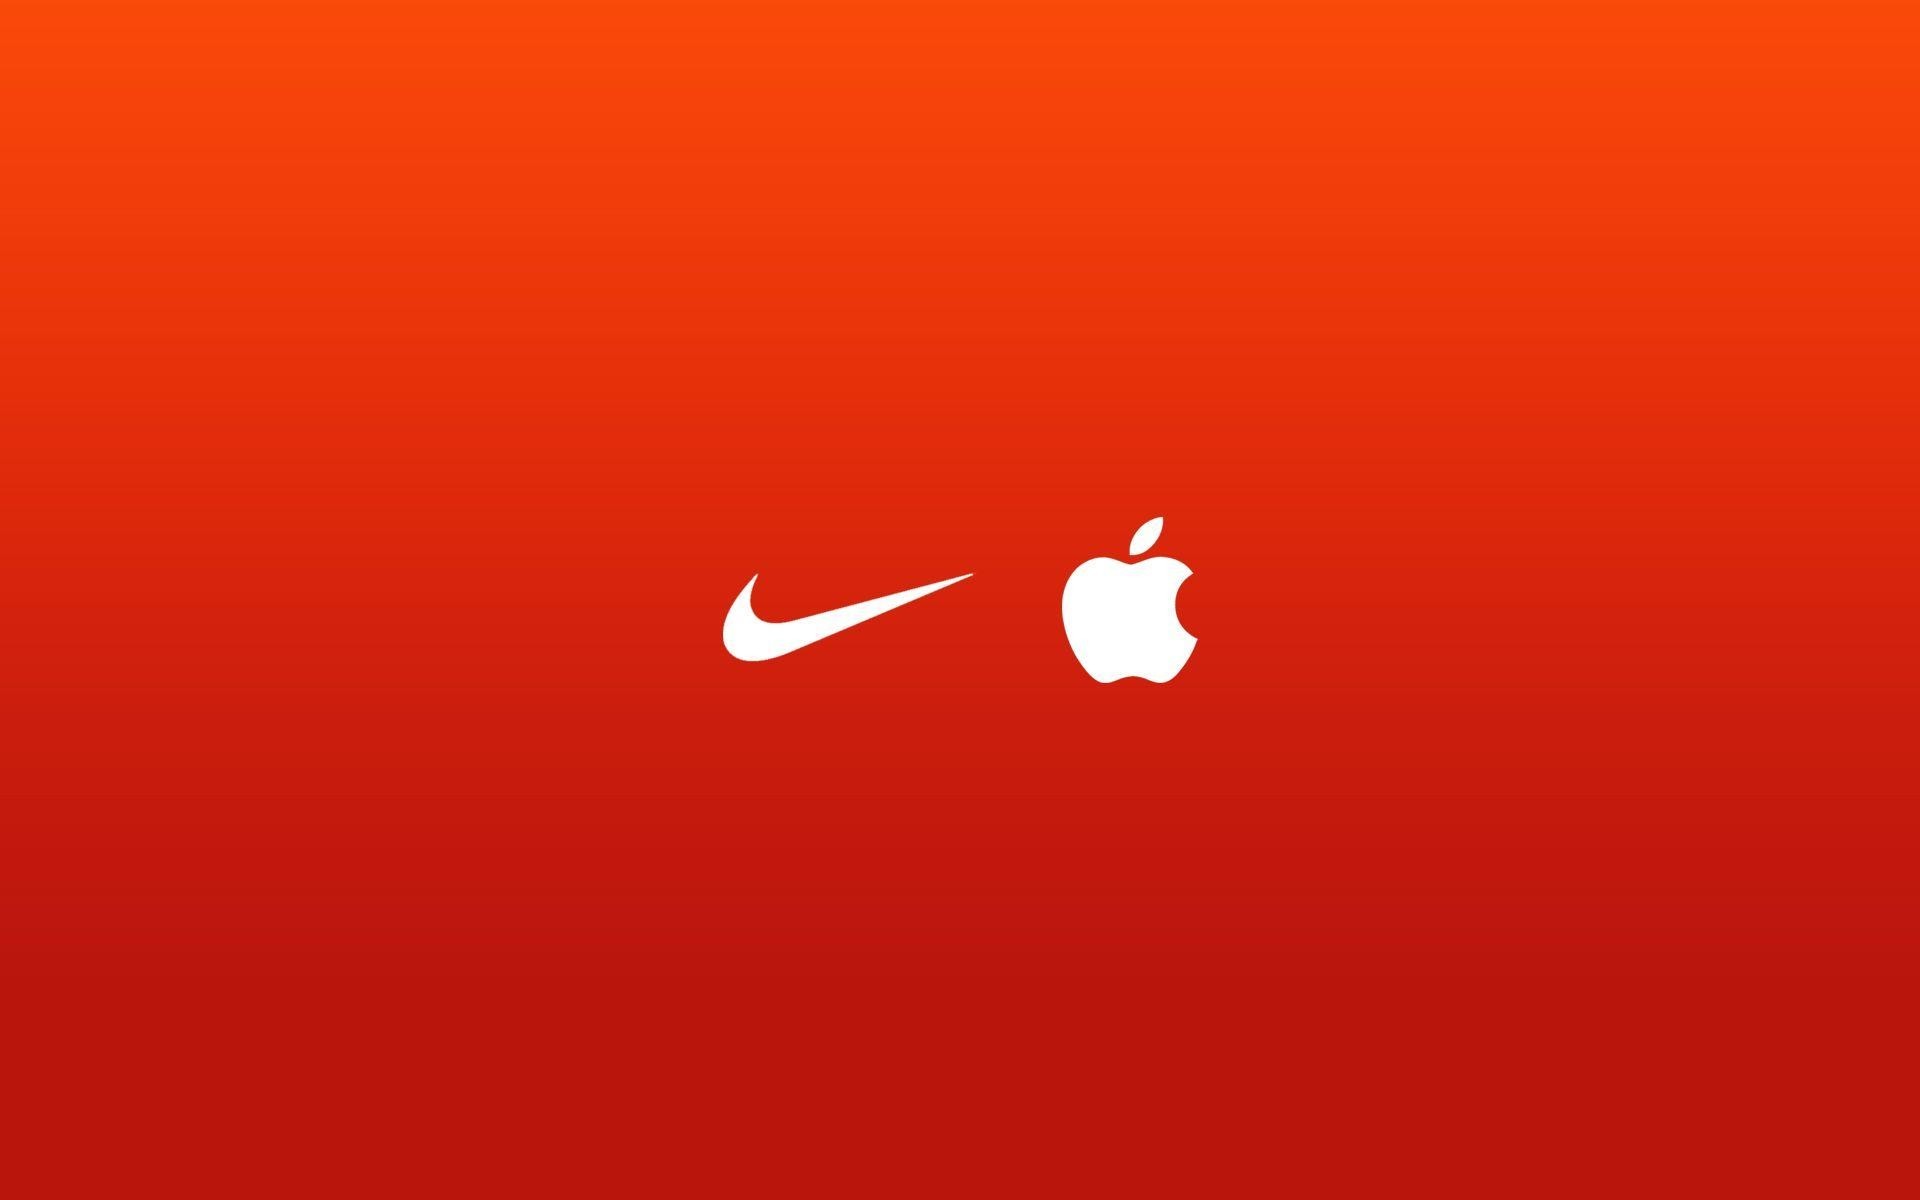 1920x1200 2048x1536 Nike Quotes Wallpaper Hd For Desktop Wallpaper 2048 x 1536 px  945.23 KB for iphone hd